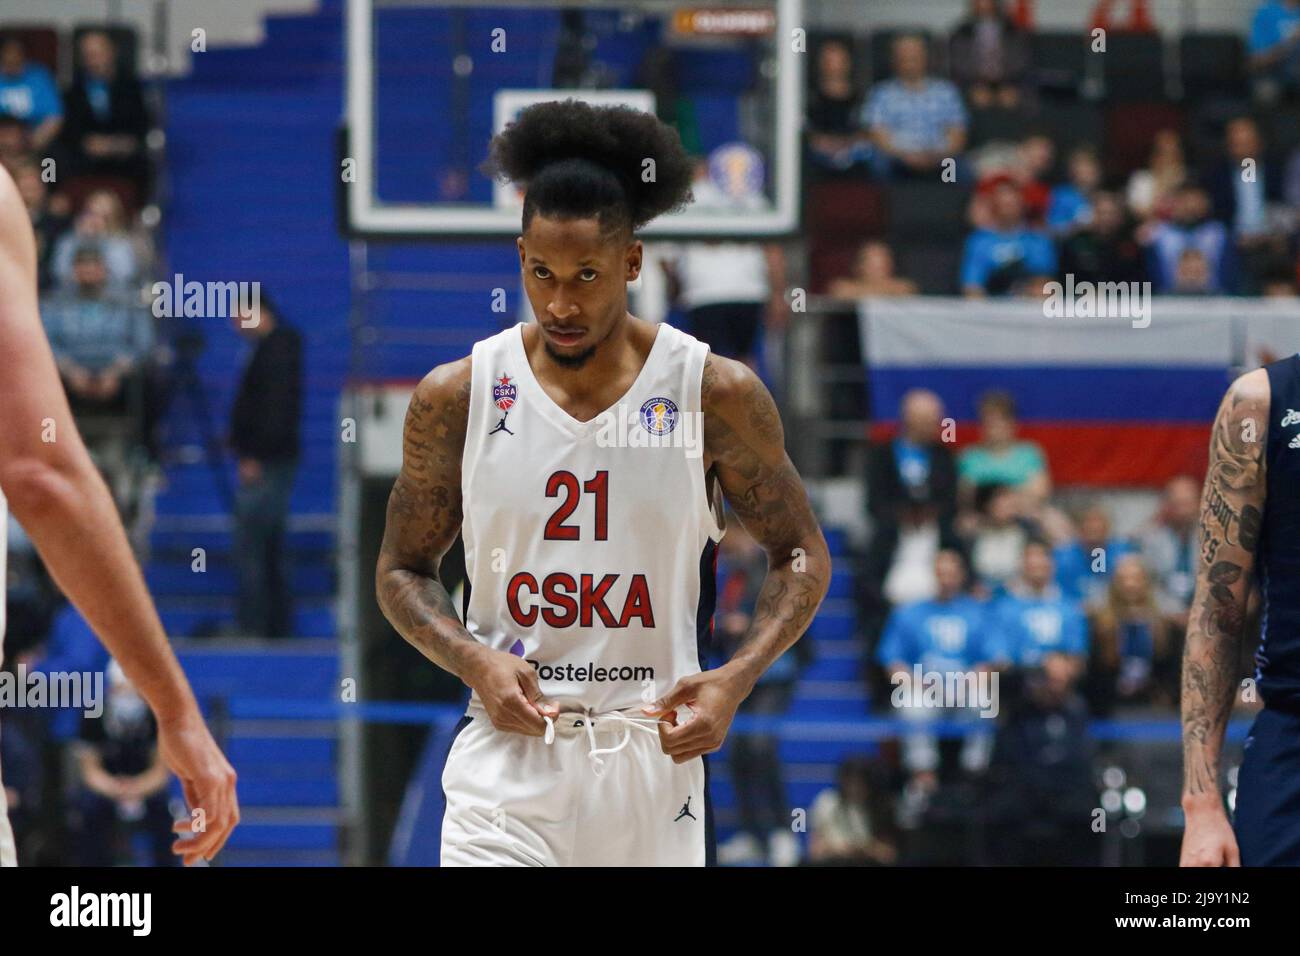 Saint Petersburg, Russia. 25th May, 2022. Will Clyburn (No.21) of CSKA seen  in action during the third match final of the VTB United League basketball  match between Zenit and CSKA at Sibur